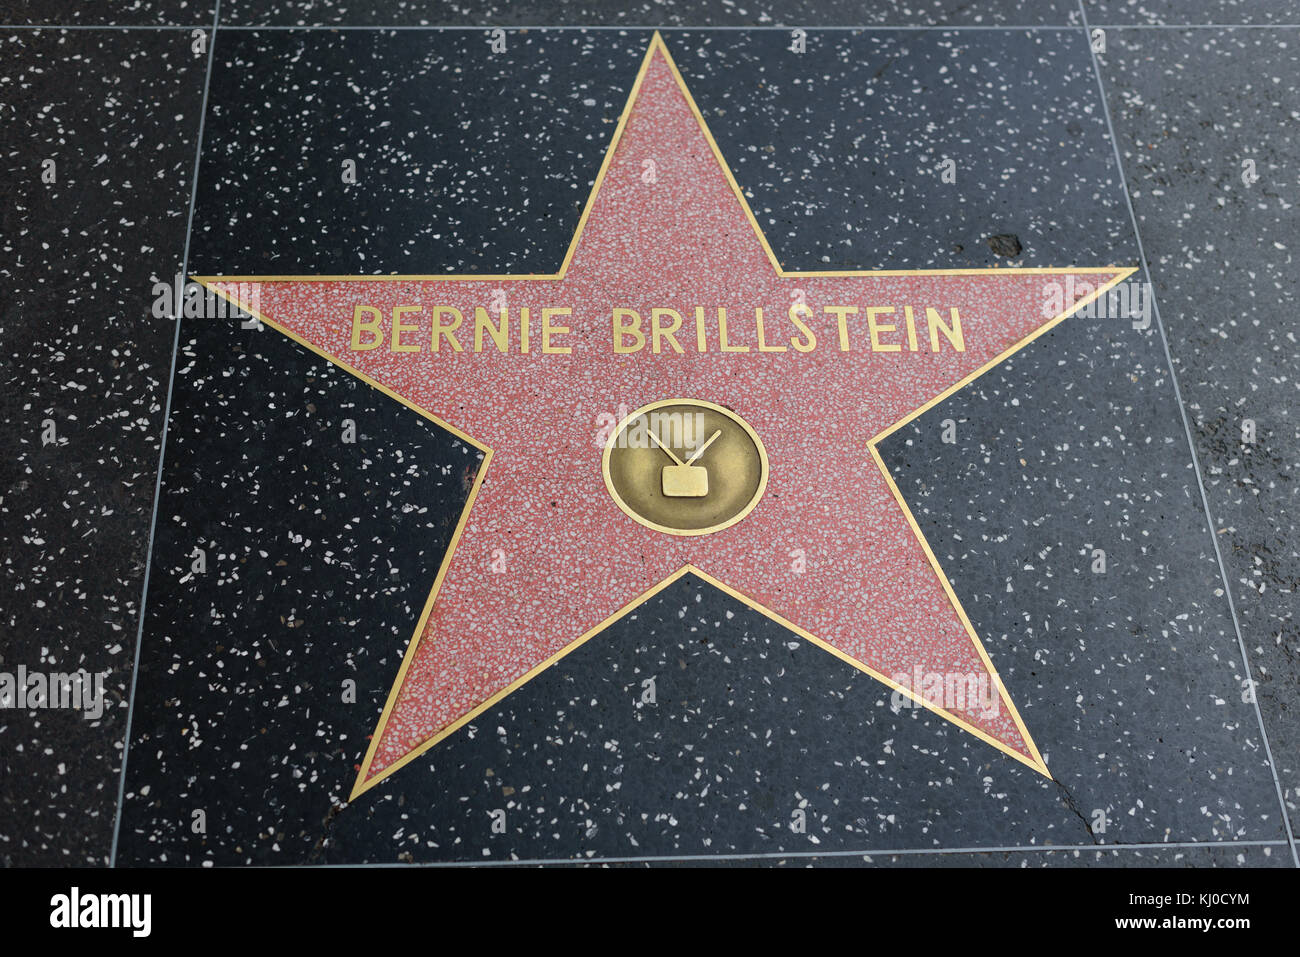 HOLLYWOOD, CA - DECEMBER 06: Bernie Brillstein star on the Hollywood Walk of Fame in Hollywood, California on Dec. 6, 2016. Stock Photo